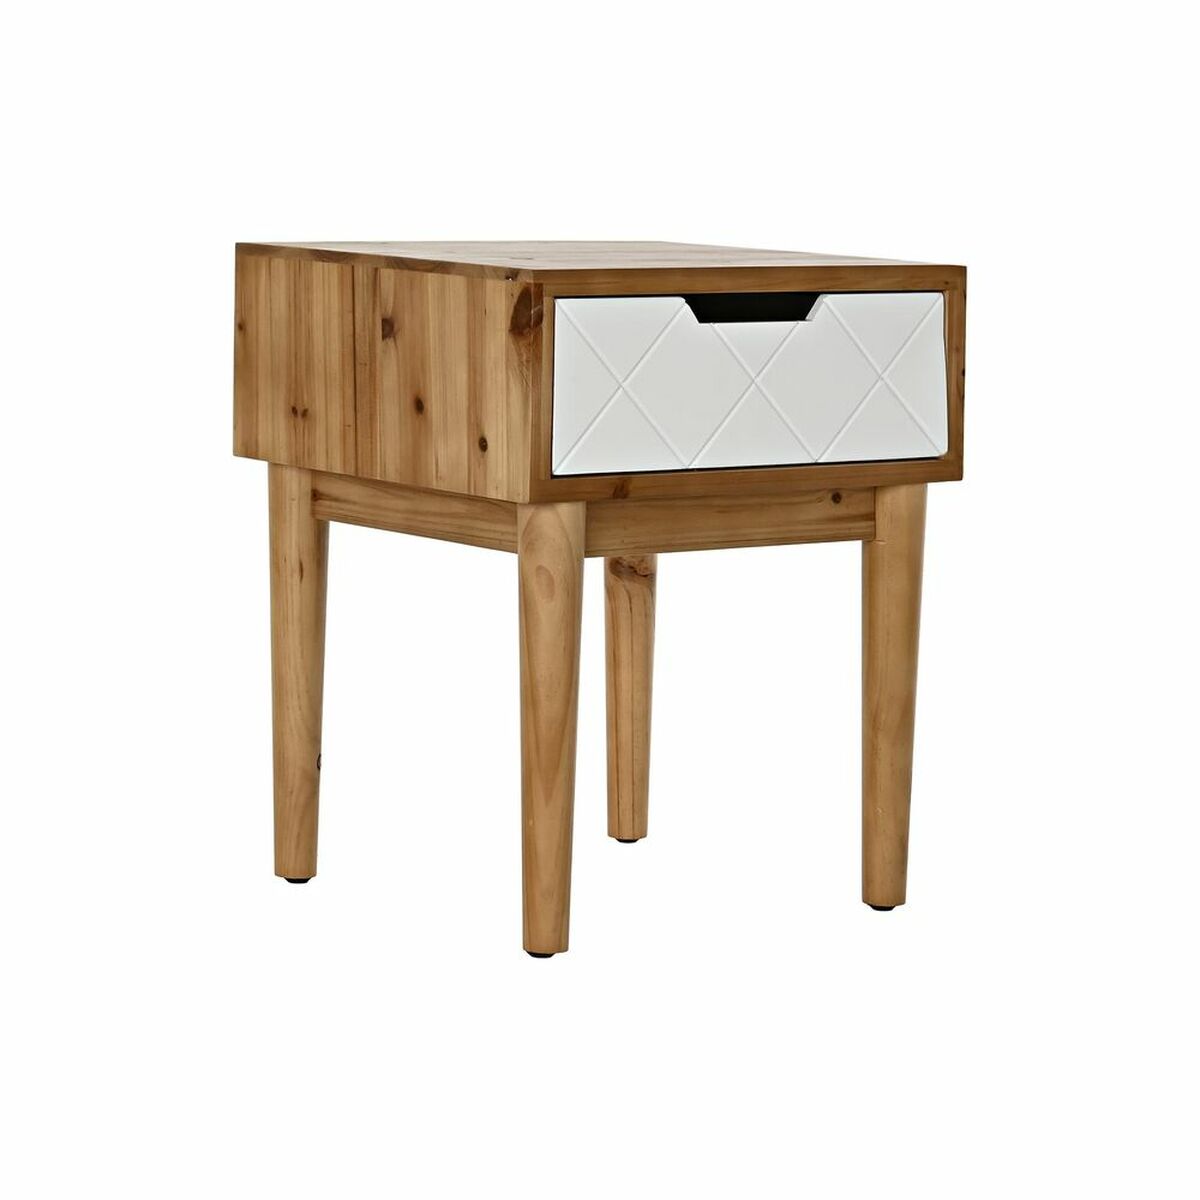 White and Natural Bedside Table in Fir Wood (42 x 38 x 50 cm)